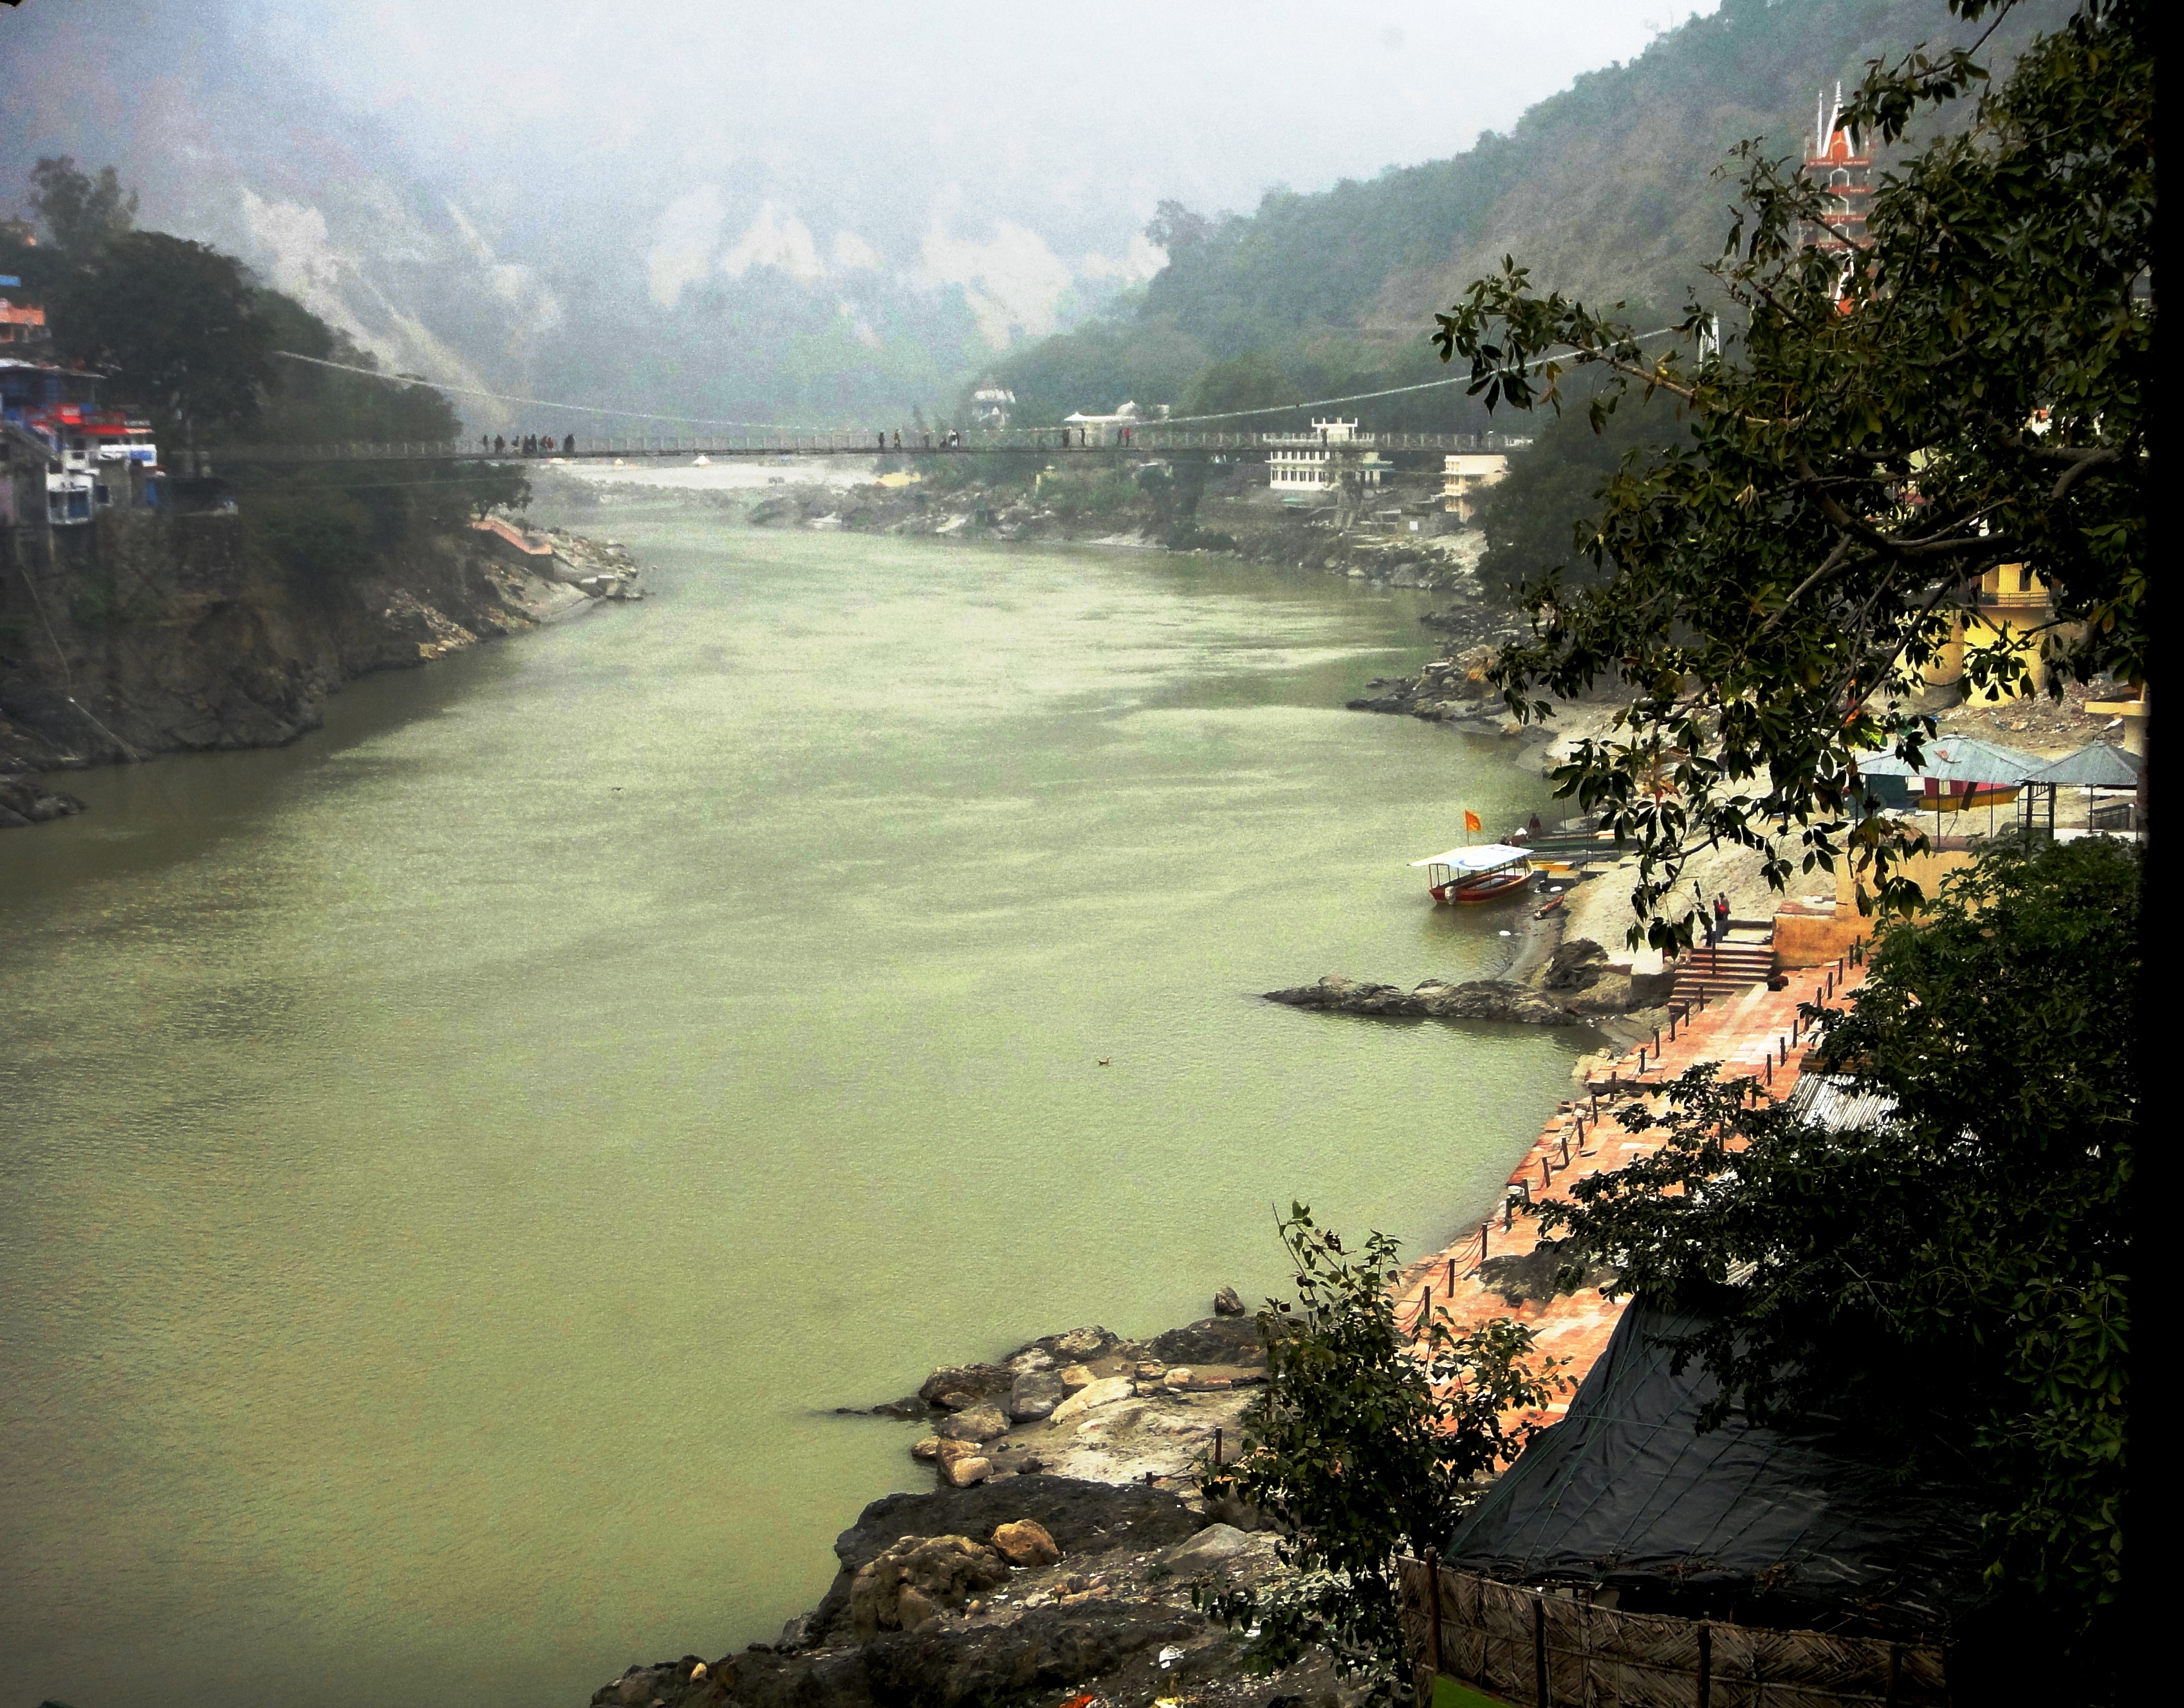 Using Water Isotopes Tracer Tech to Track Ganga's Origin